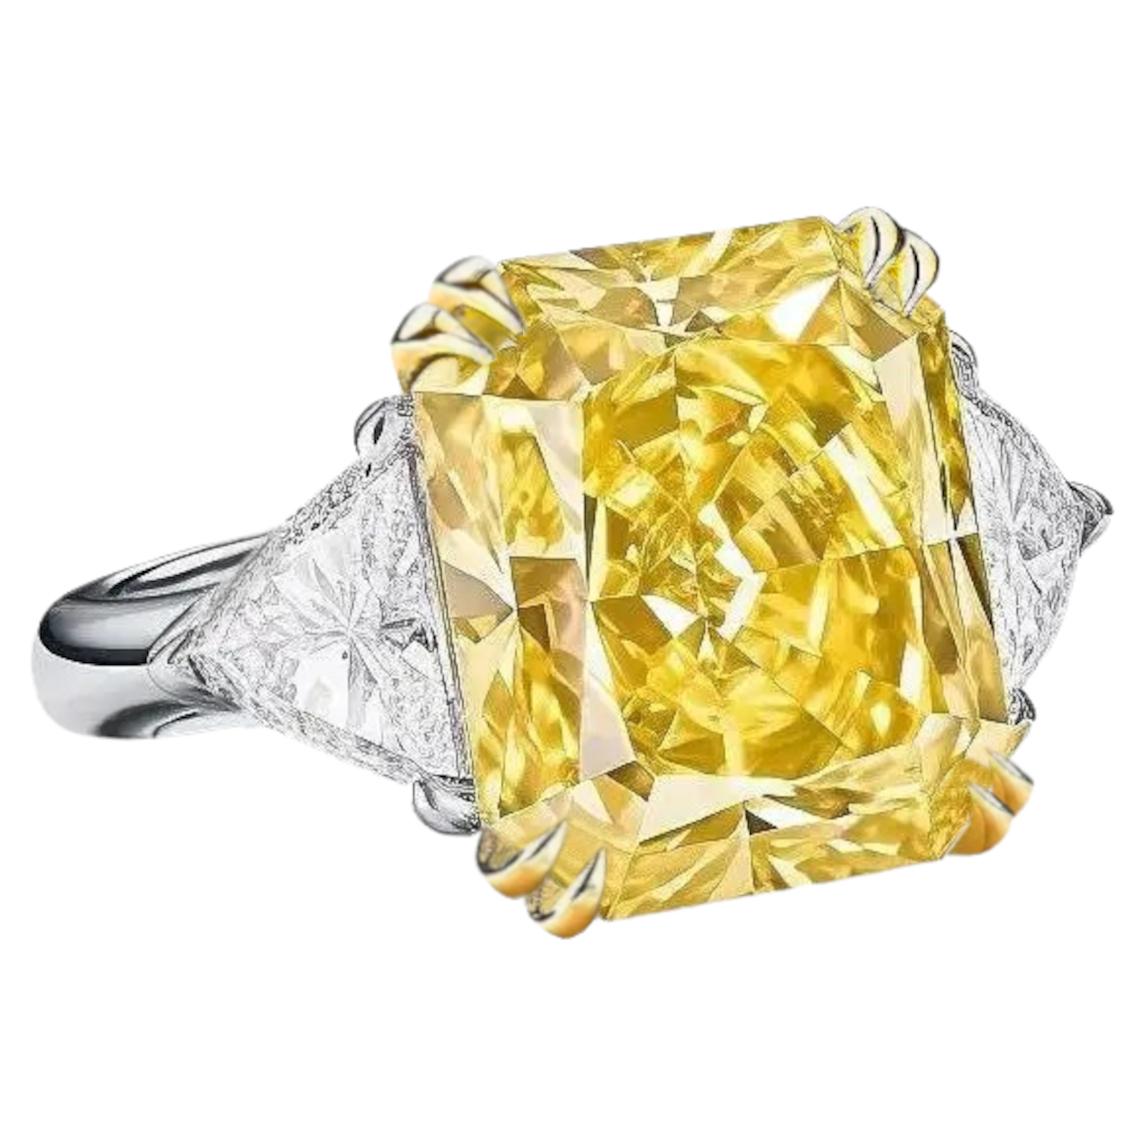 Invest in Elegance and Rarity: The 10 Carat Fancy Yellow Radiant Cut Diamond Ring!

Prepare to step into the realm of true opulence and exclusivity with our remarkable 10 carat Fancy Yellow Radiant Cut Diamond Ring. This exceptional piece transcends